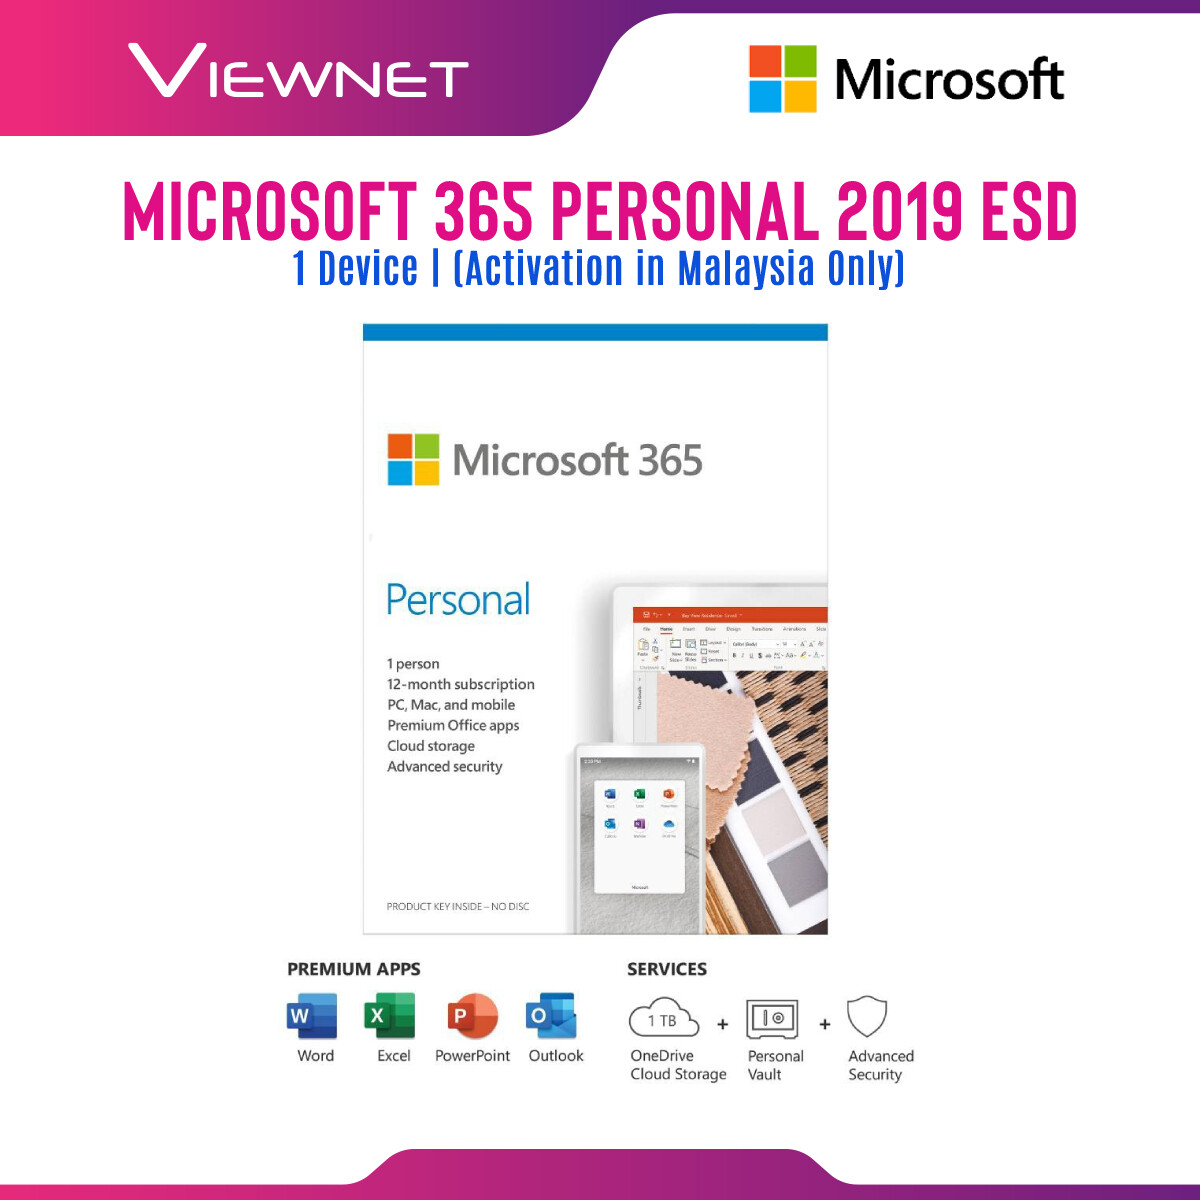 Microsoft 365 Personal | 3 Months Free with purchase of PC Mac Tablet Smartphone or PC Accessory,  Plus 12 Month Subscription, up to 5 Devices | Premium Office Apps | 1TB OneDrive Cloud Storage | PC/Mac Download (Renews to 12 Month Subscription)